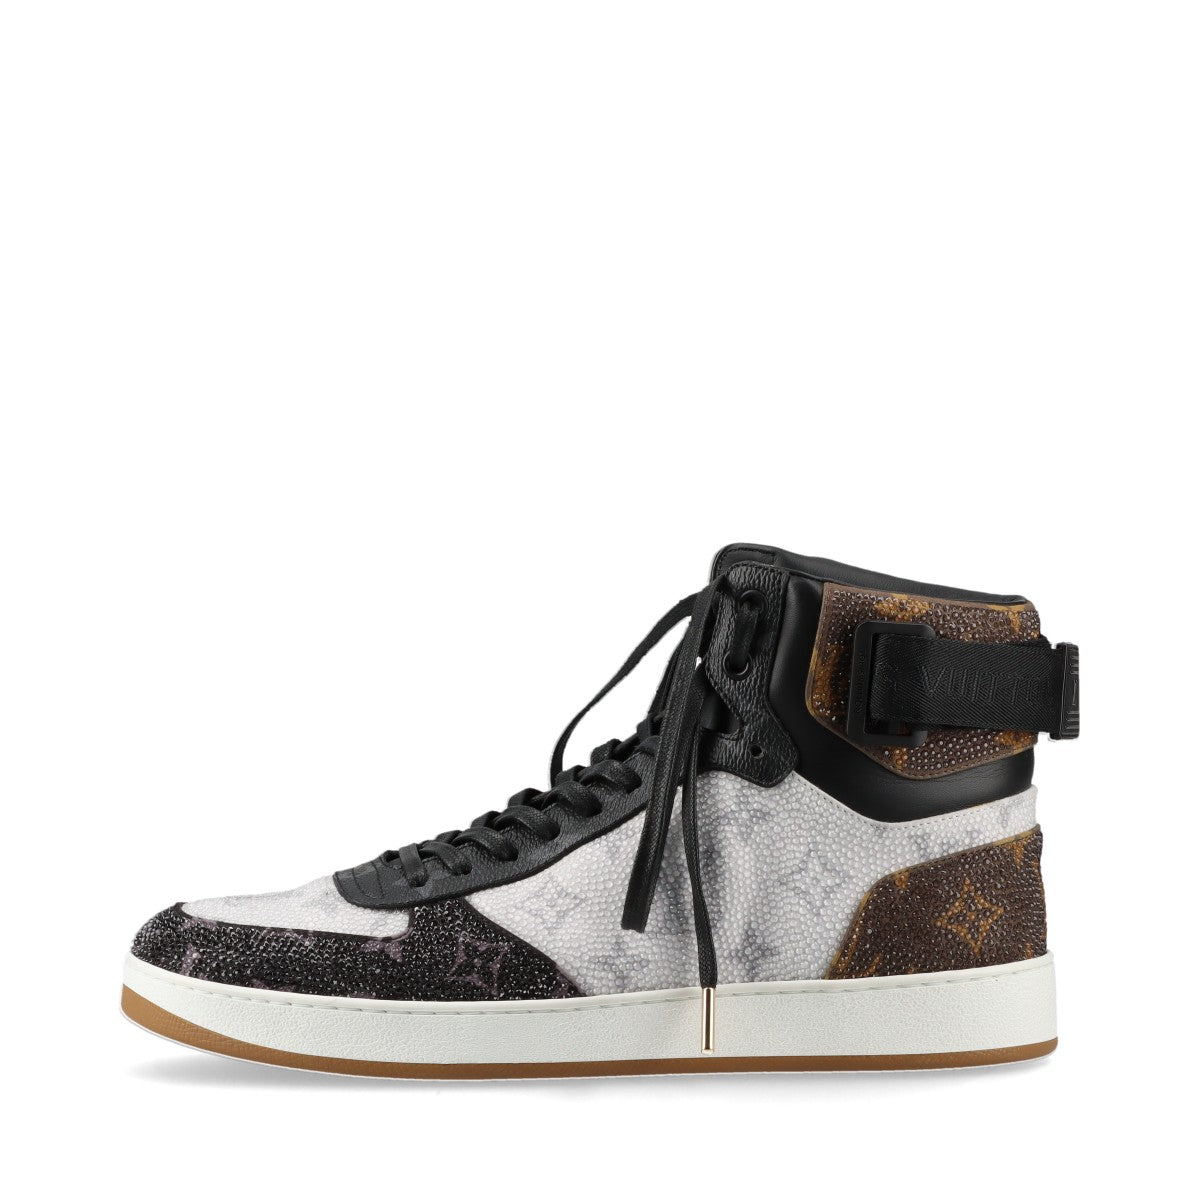 Louis Vuitton Rivoli line 18 years PVC & leather High-top Sneakers UK6 Men's Black × White MS1108 Monogram Swarovski There is a replacement string